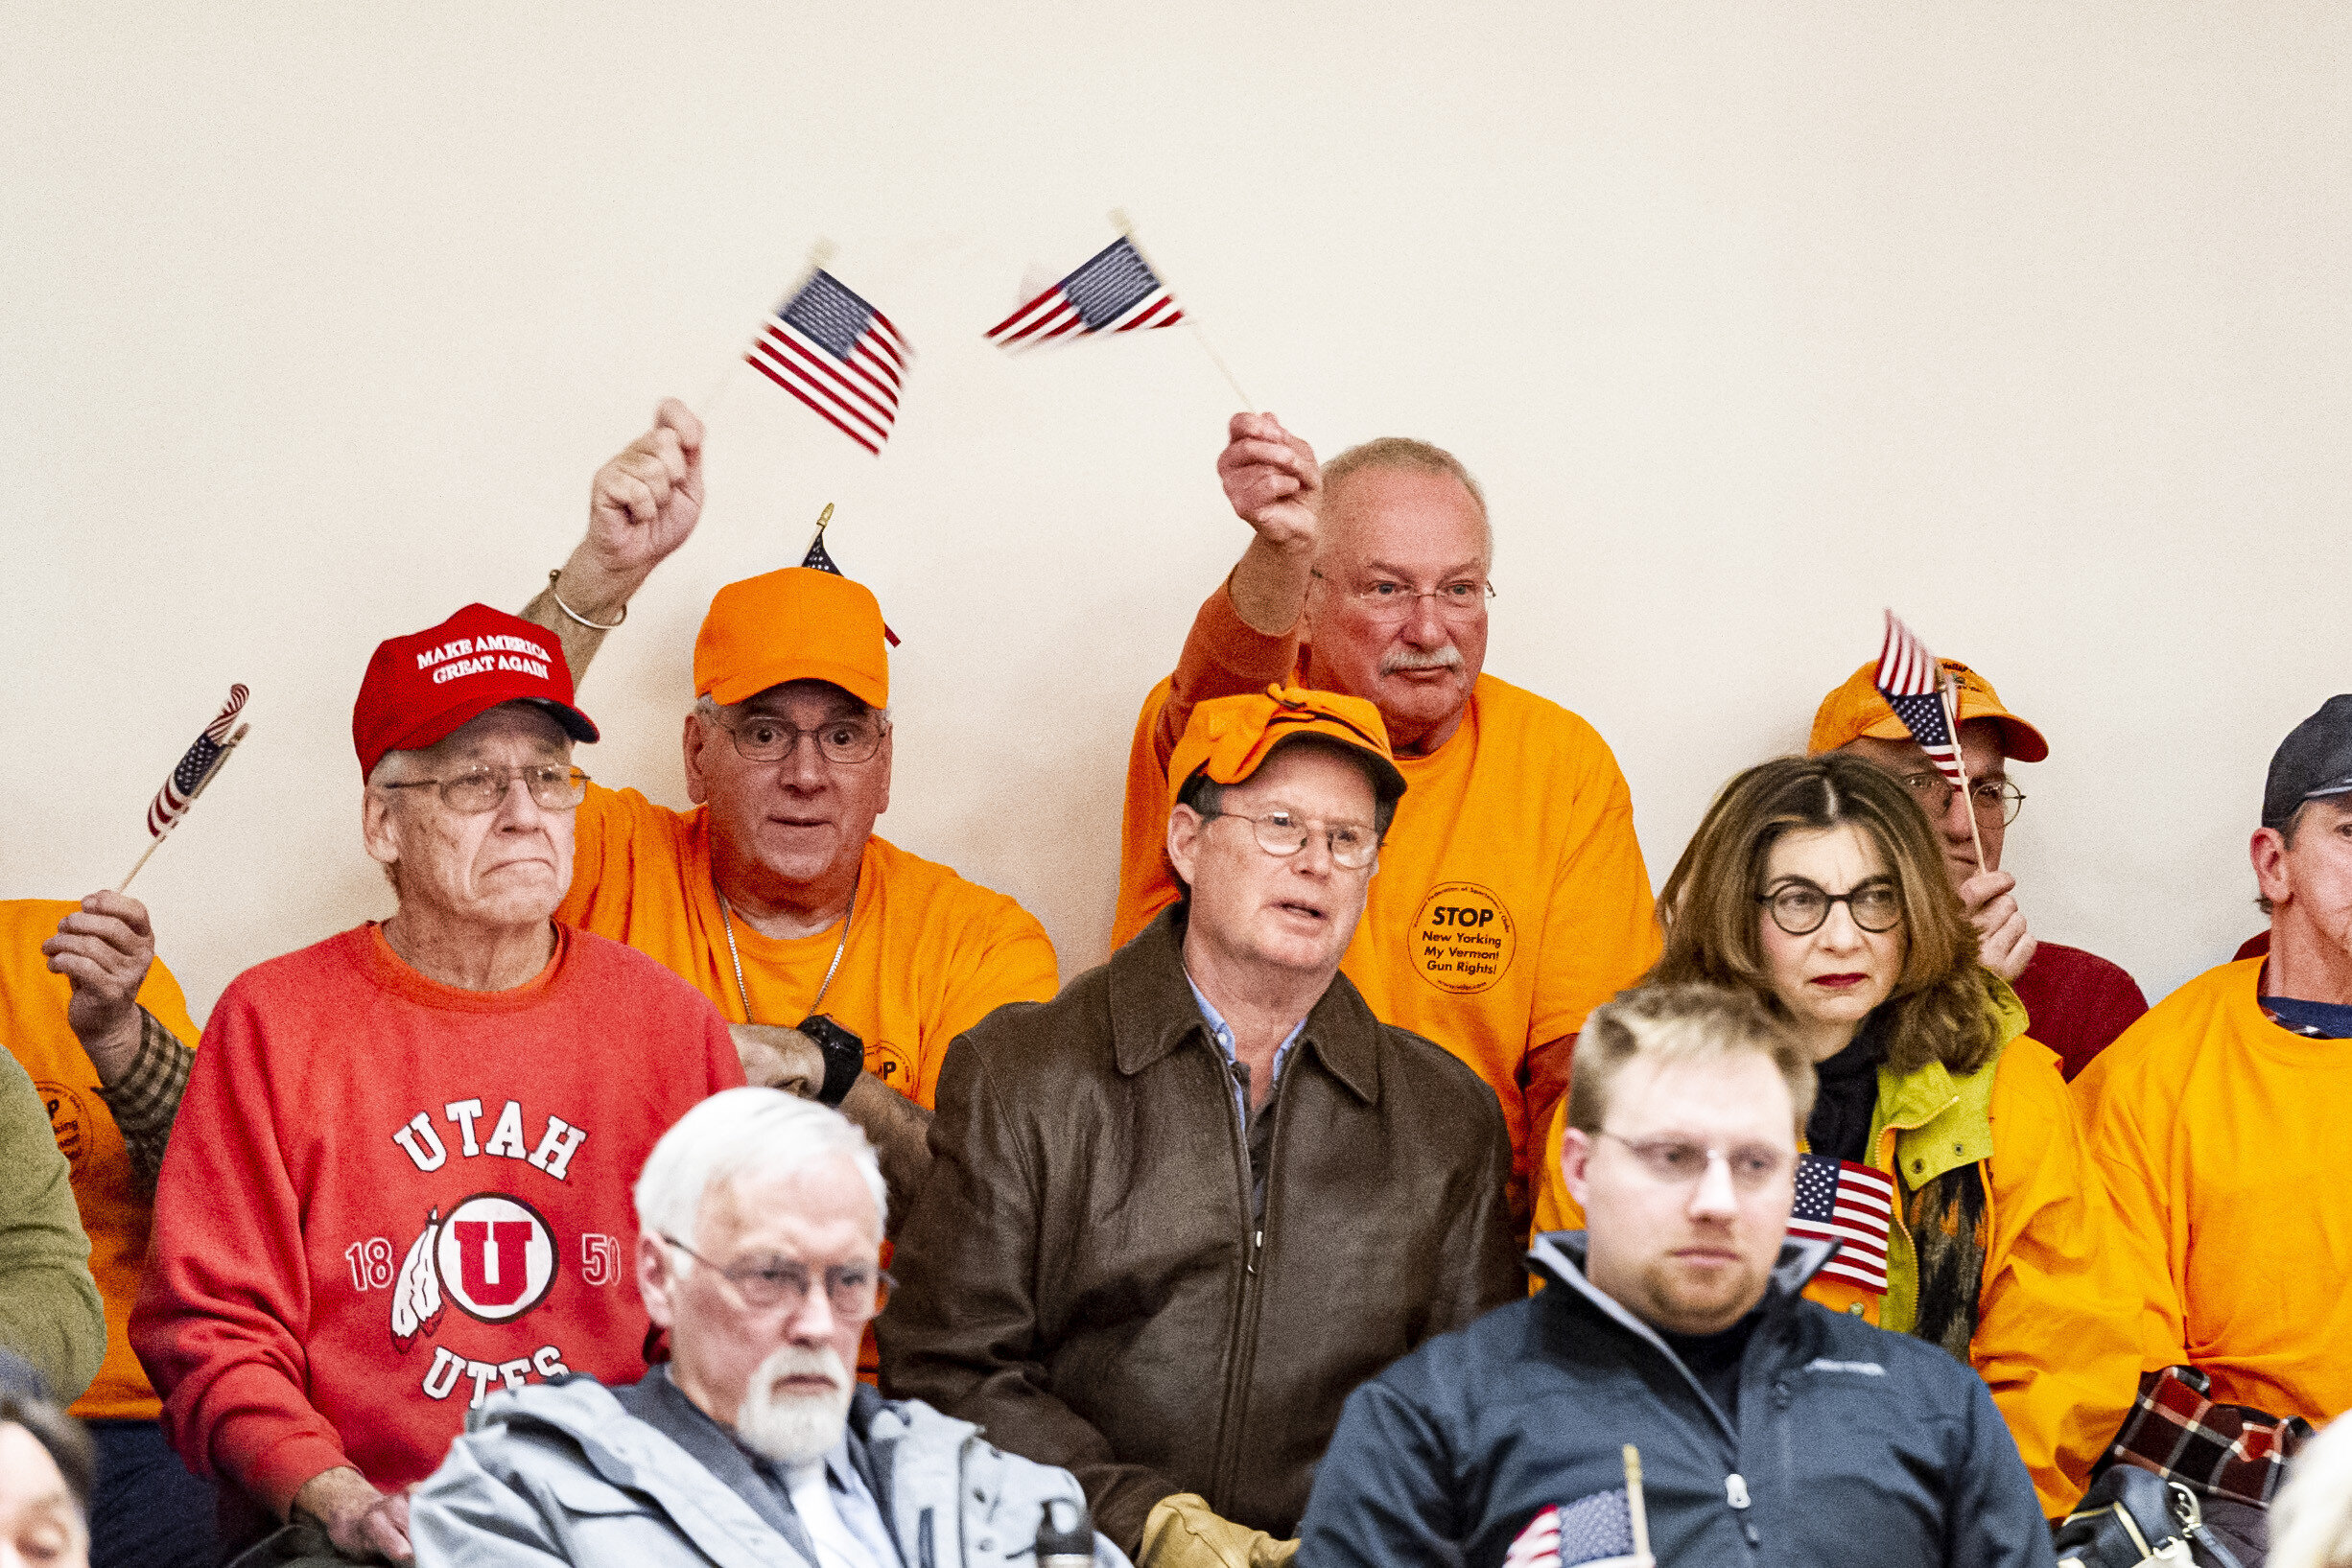  Opponents of the H.610 firearms and domestic violence legislation cheer on a speaker also opposed to the law during public hearings at the State House in Montpelier, VT on Tuesday, February 18th 2020. 